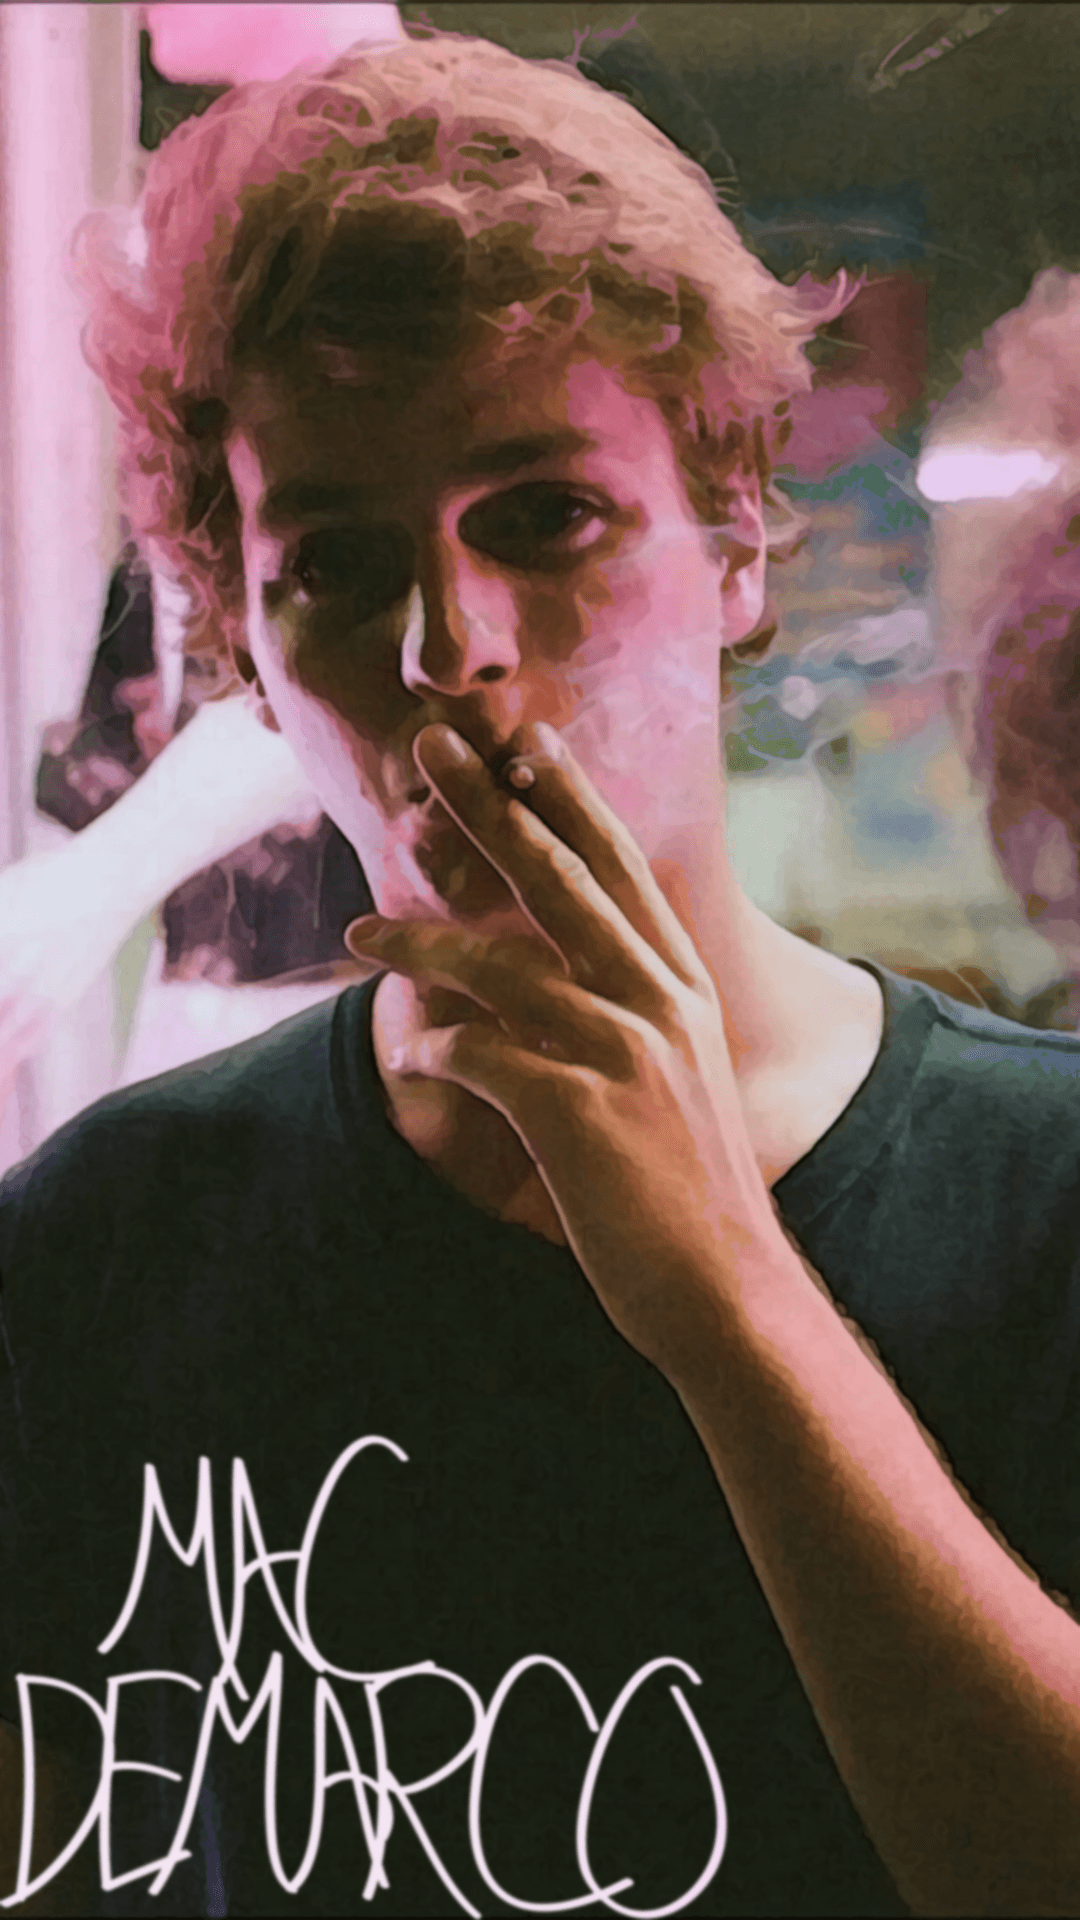 Heres a Mac DeMarco phone wallpaper I made in celebration of Here Comes  The Cowboy  rmacdemarco